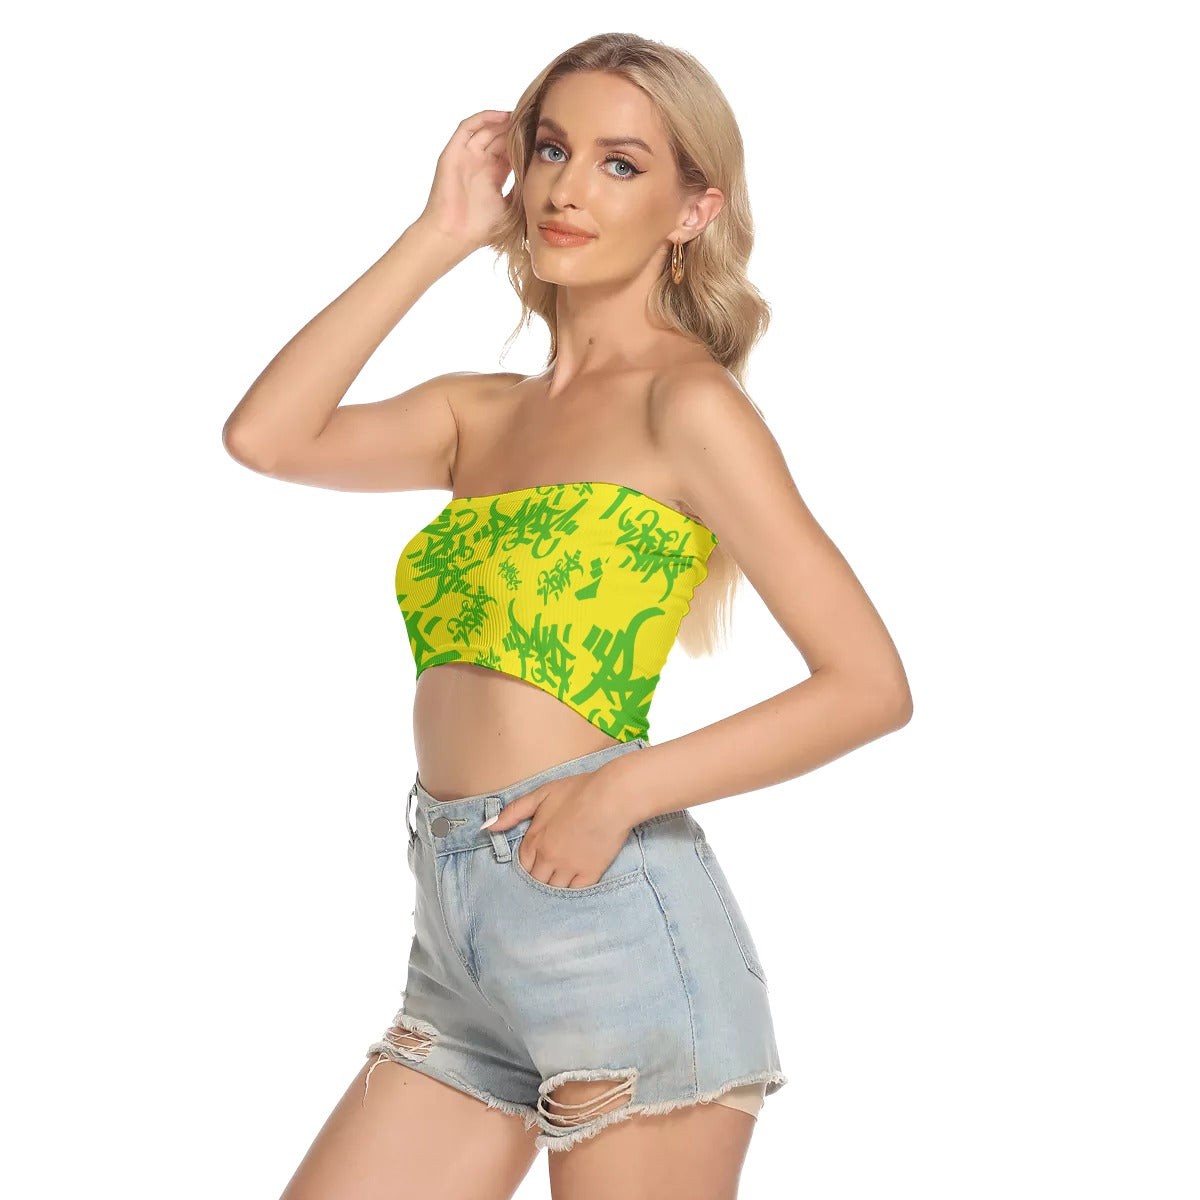 THE TAG TUBE TOP IN YELLOW/KELLY - Panic 39